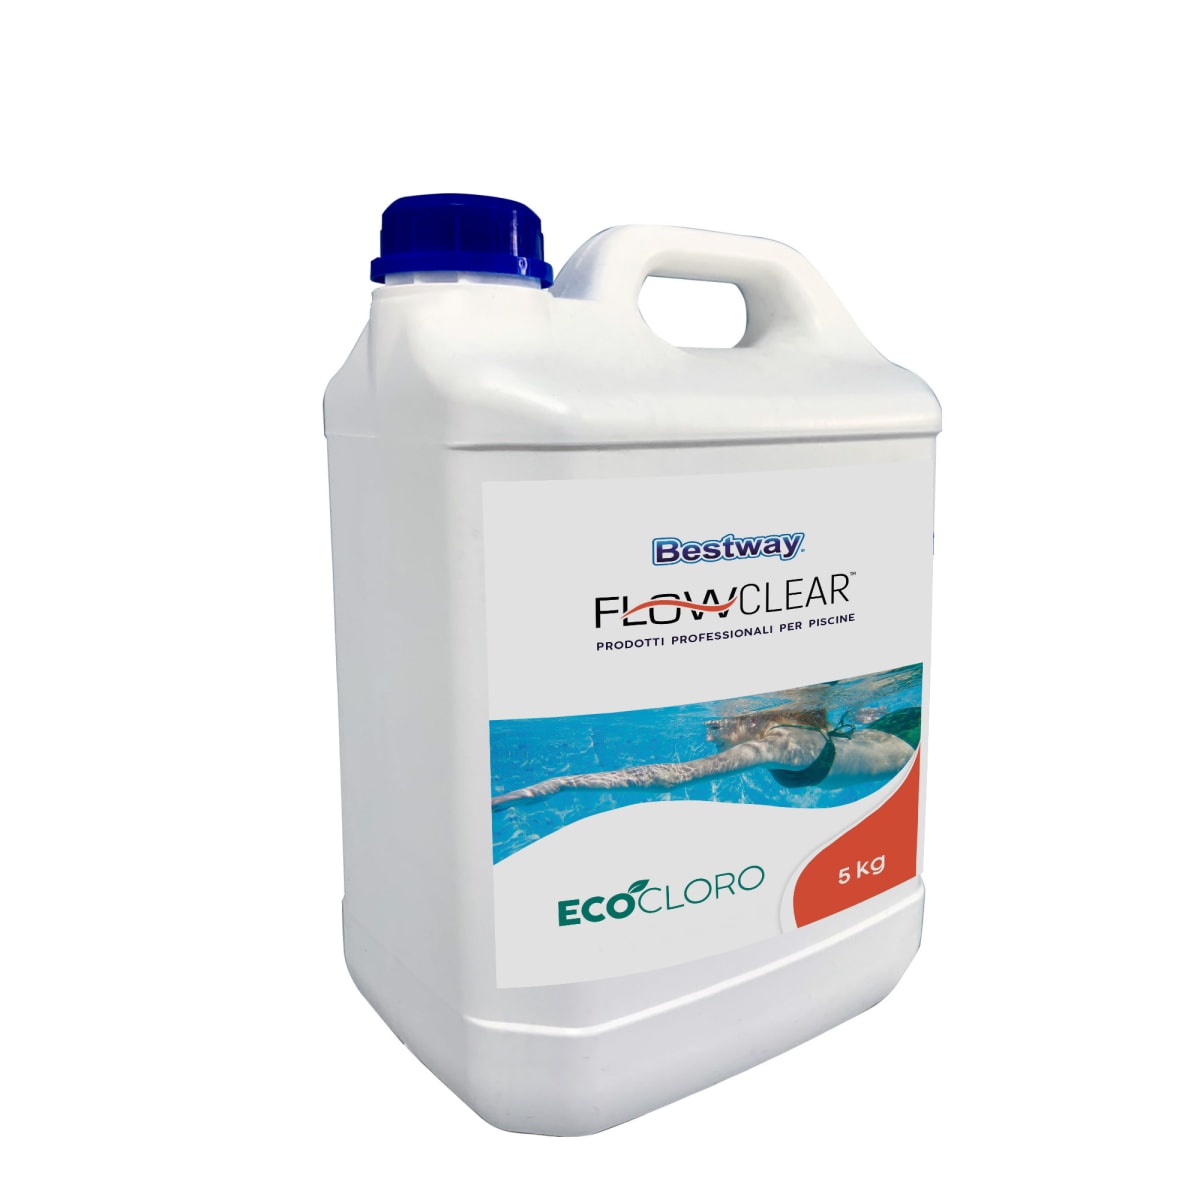 ECO CHLORINE 5 KG FOR SWIMMING POOLS